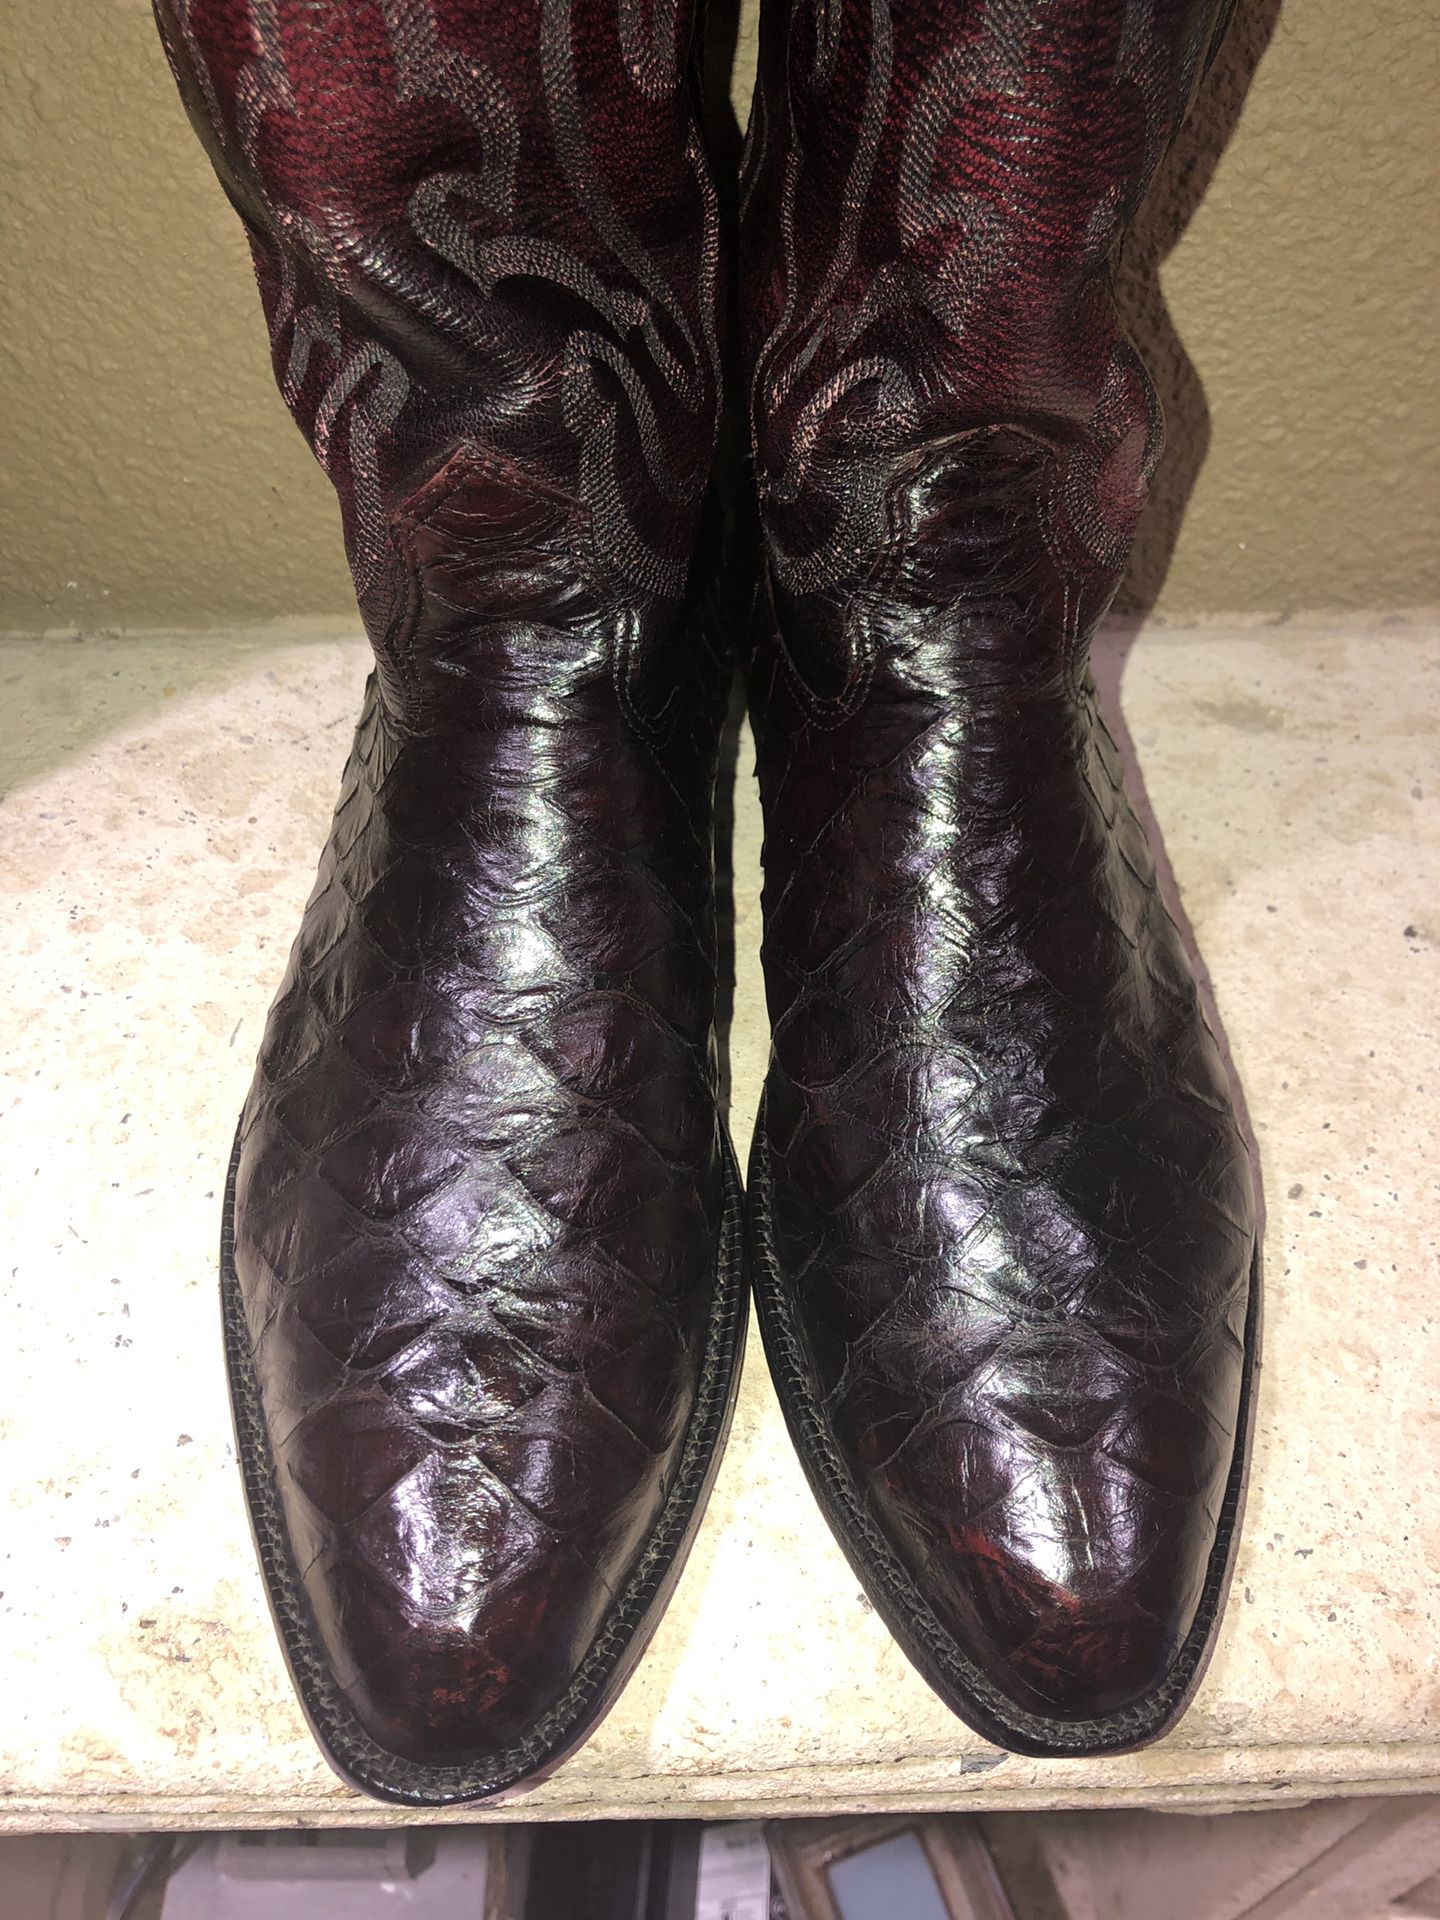 Nocona Anteater boots for Sale in Houston, TX - OfferUp